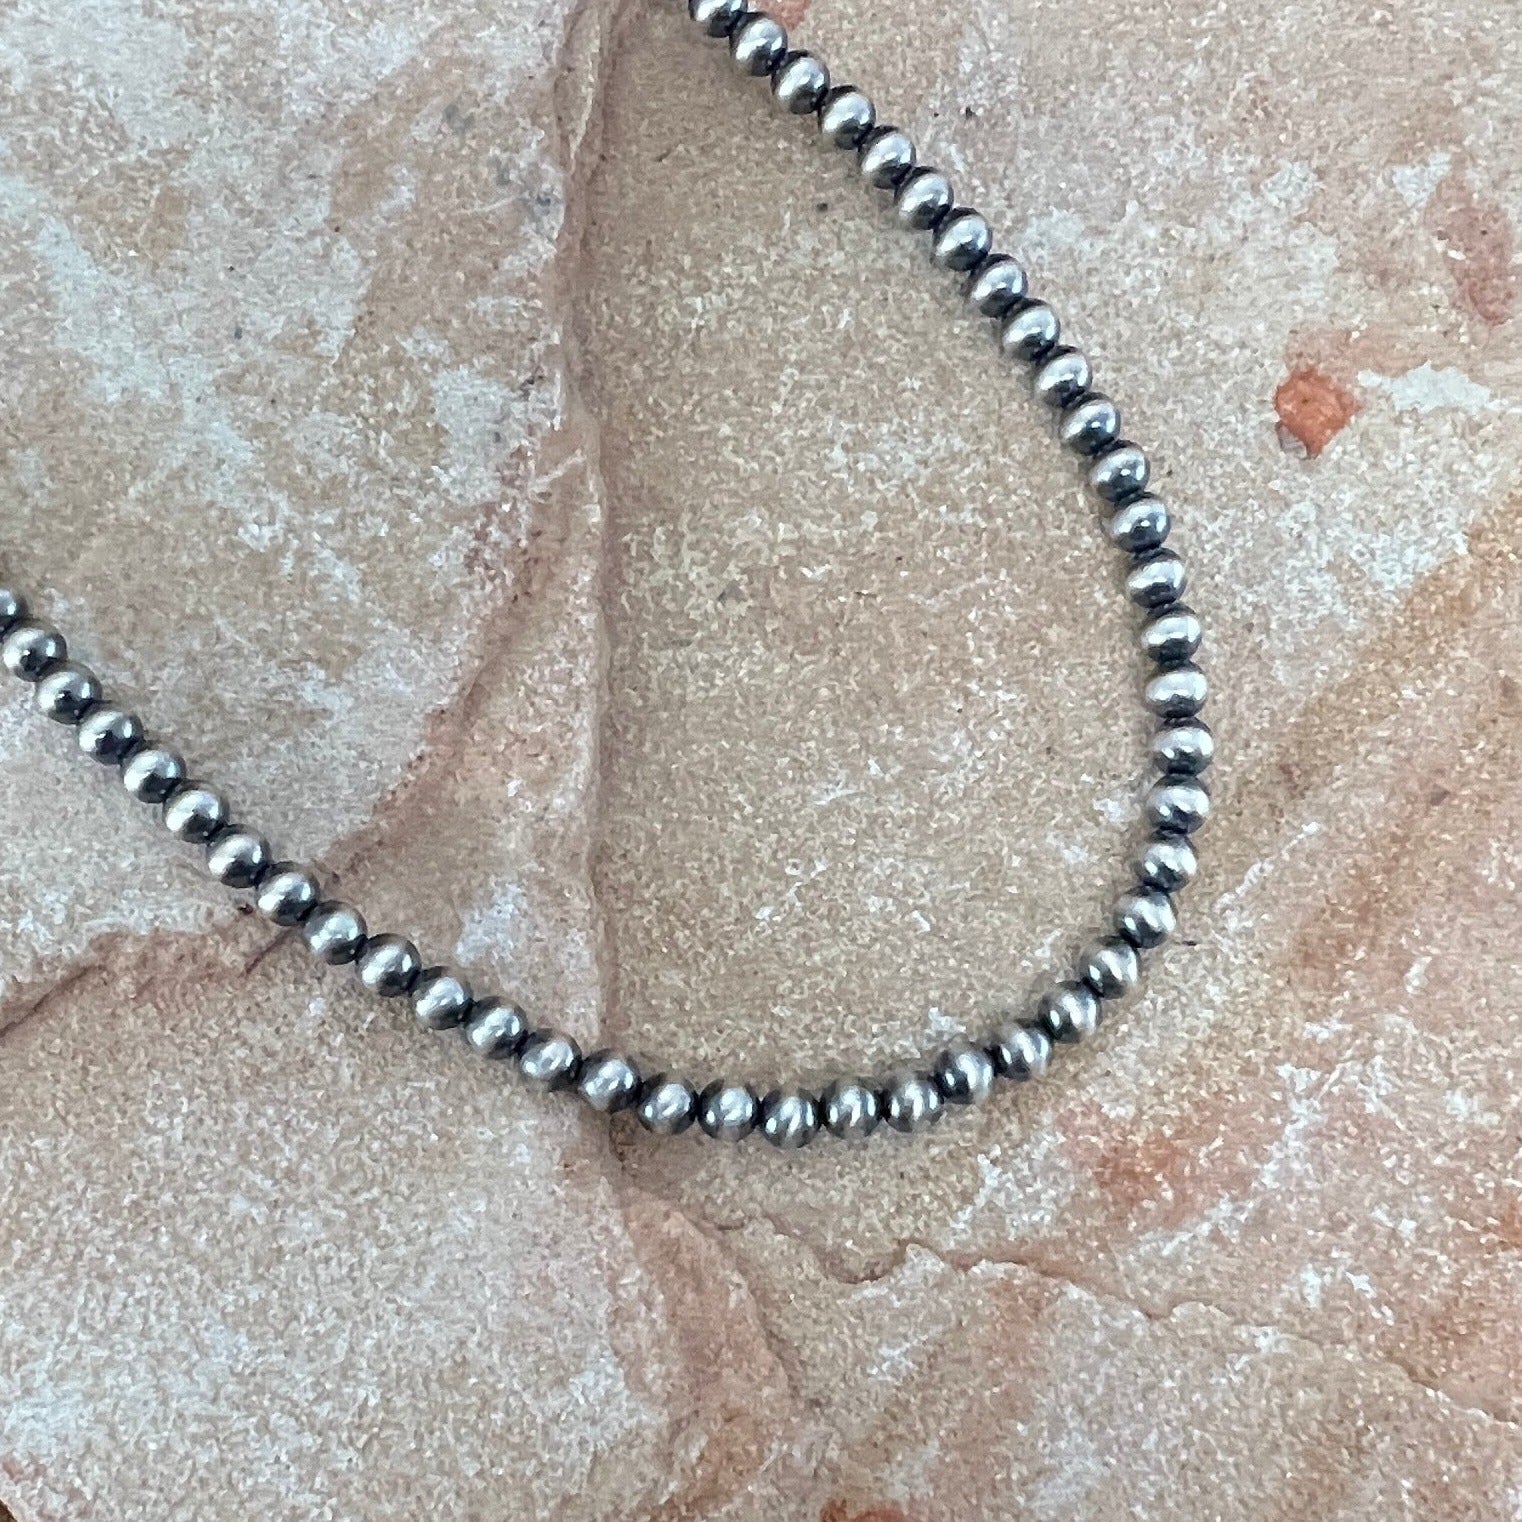 22 Single Strand Oxidized Sterling Silver Beaded Necklace 5 mm